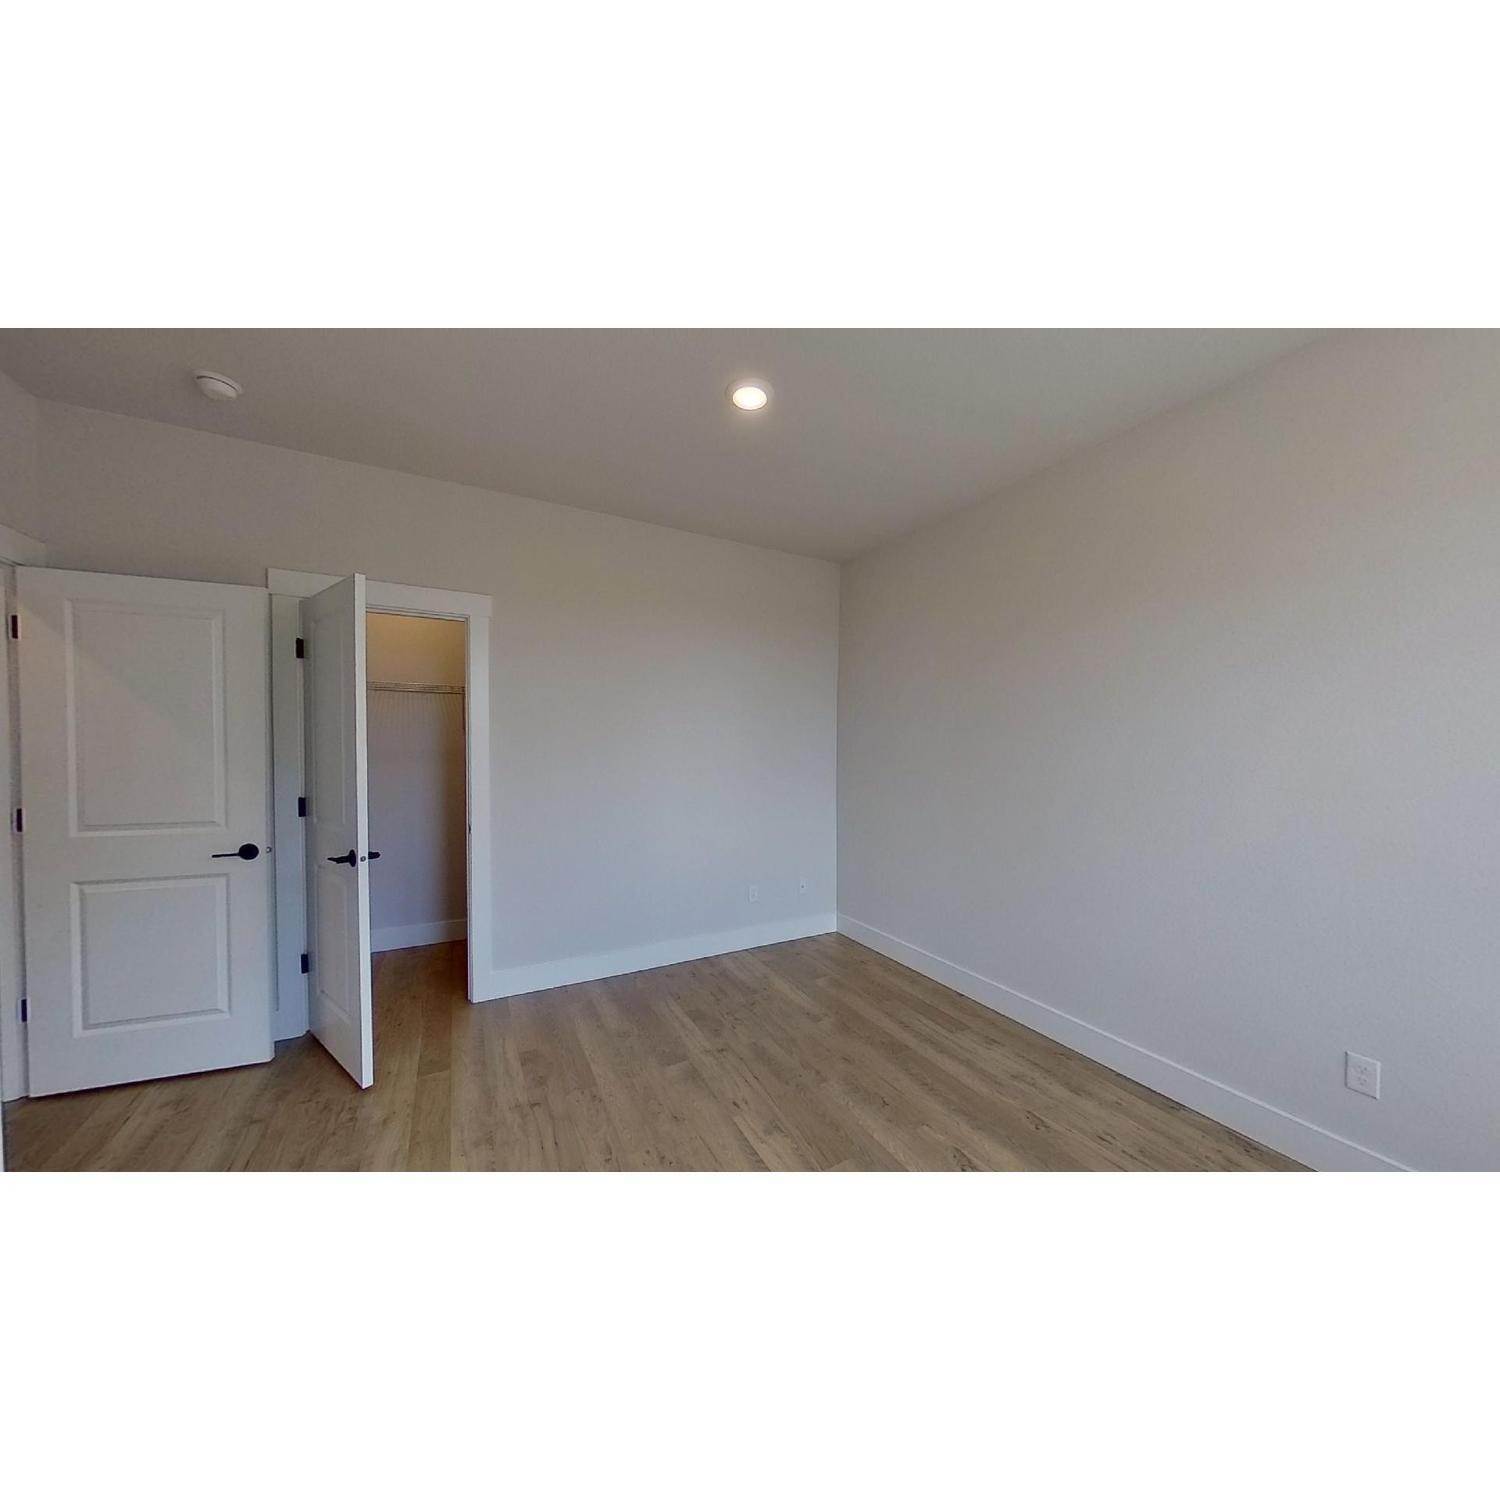 12. 16786 SW Leaf Lane, Tigard, OR 97224에 South River Terrace Innovate Condominiums 건물